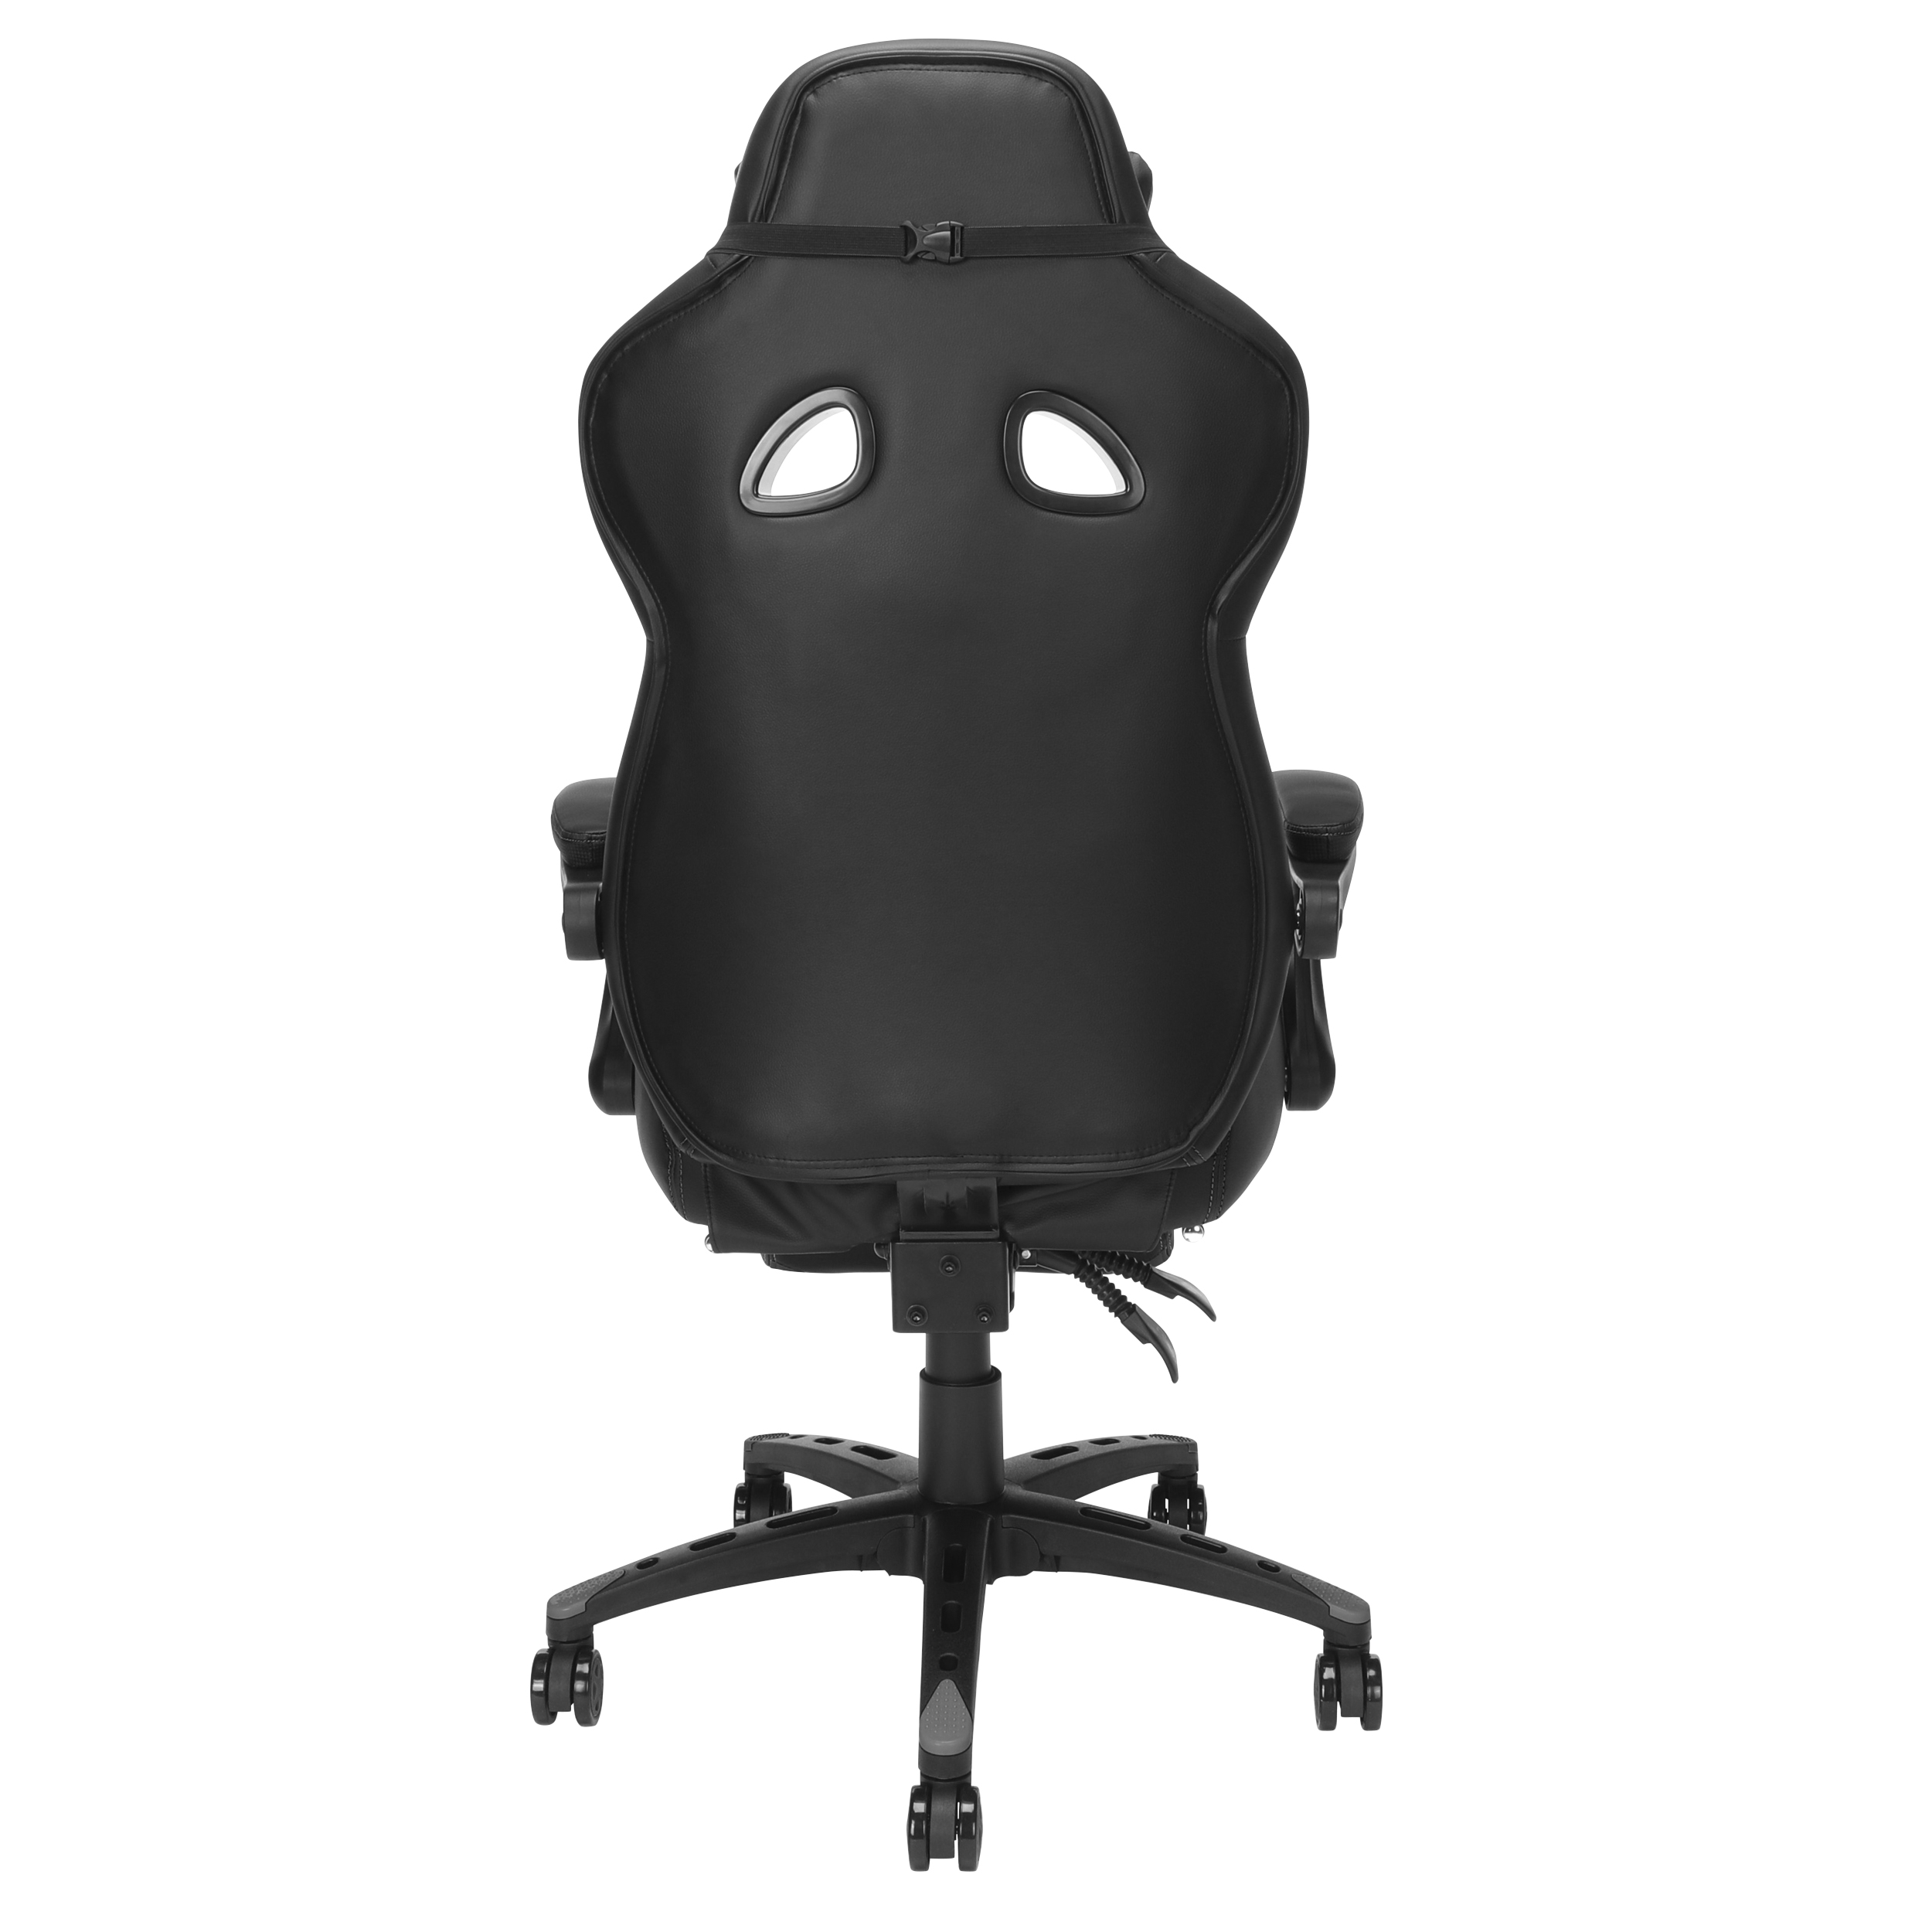 RESPAWN 110 Pro Gaming Chair - Gaming Chair with Footrest, Reclining Gaming Chair, Video Gaming Computer Desk Chair, Adjustable Desk Chair, Gaming Chairs For Adults With Headrest Pillow - Grey - image 5 of 10